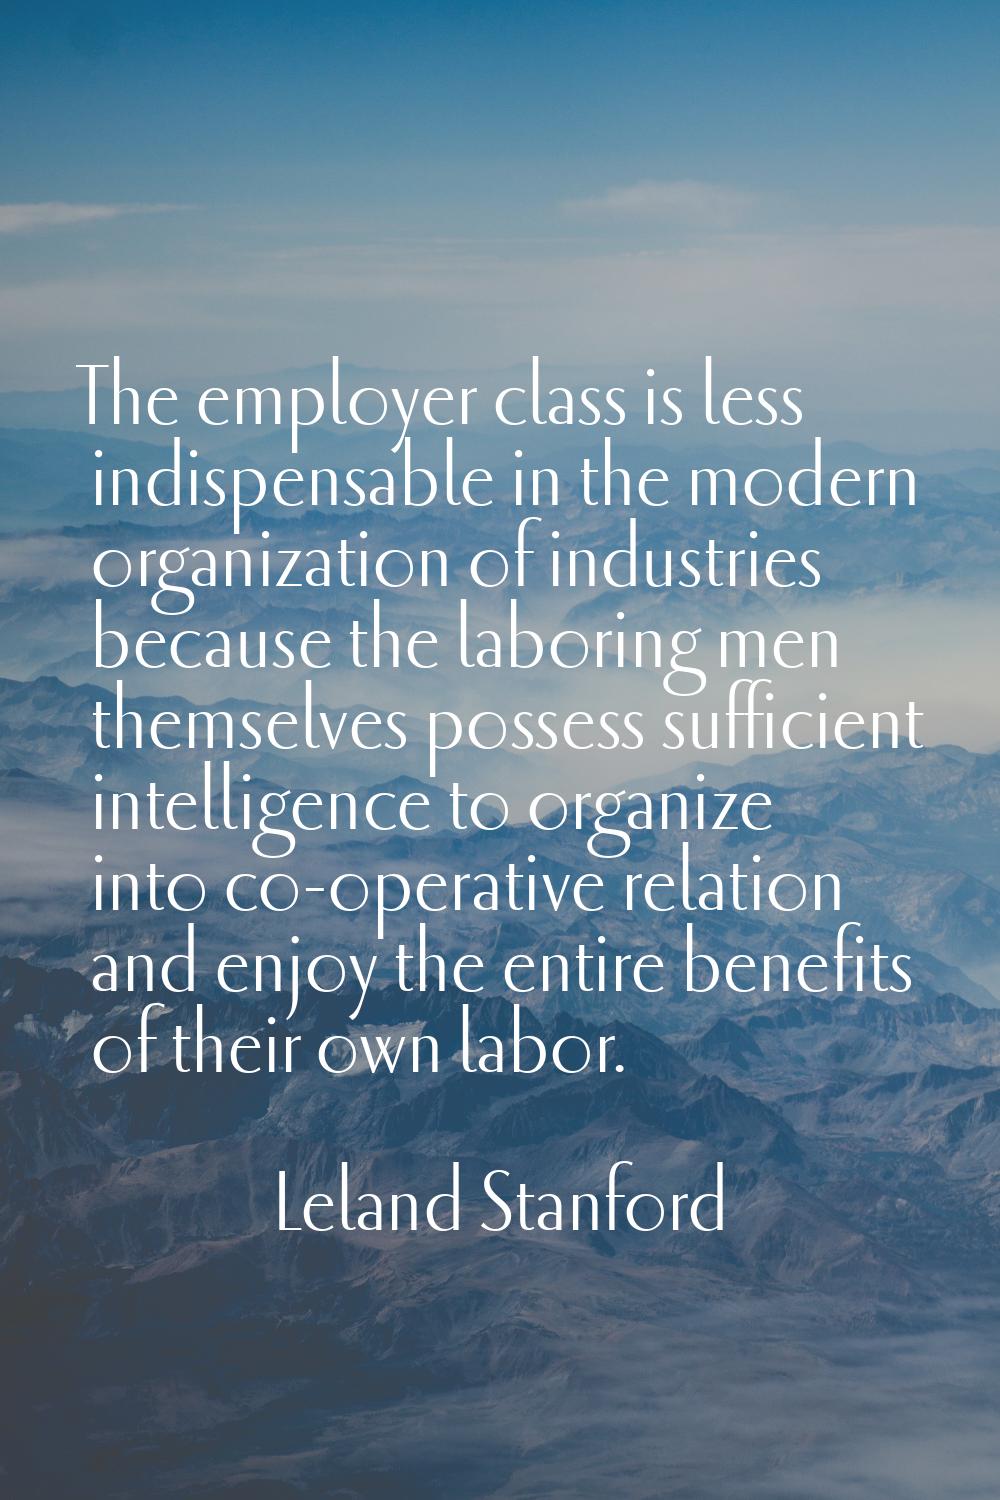 The employer class is less indispensable in the modern organization of industries because the labor